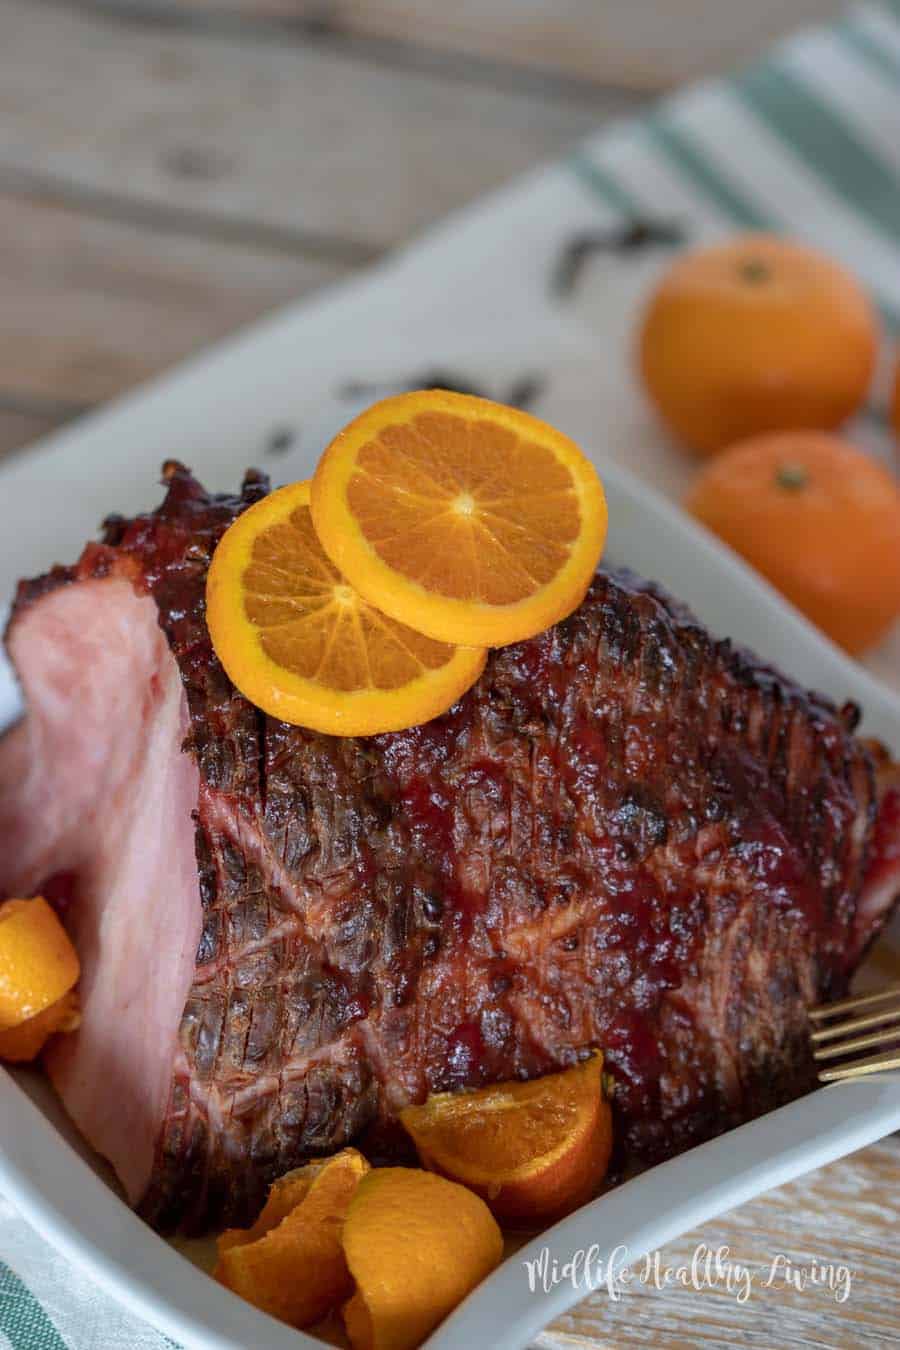 This Weight Watchers citrus and cranberry ham is a snap to make.  There are 5 Weight Watchers Freestyle Smart Points in each serving of this delicious ham.